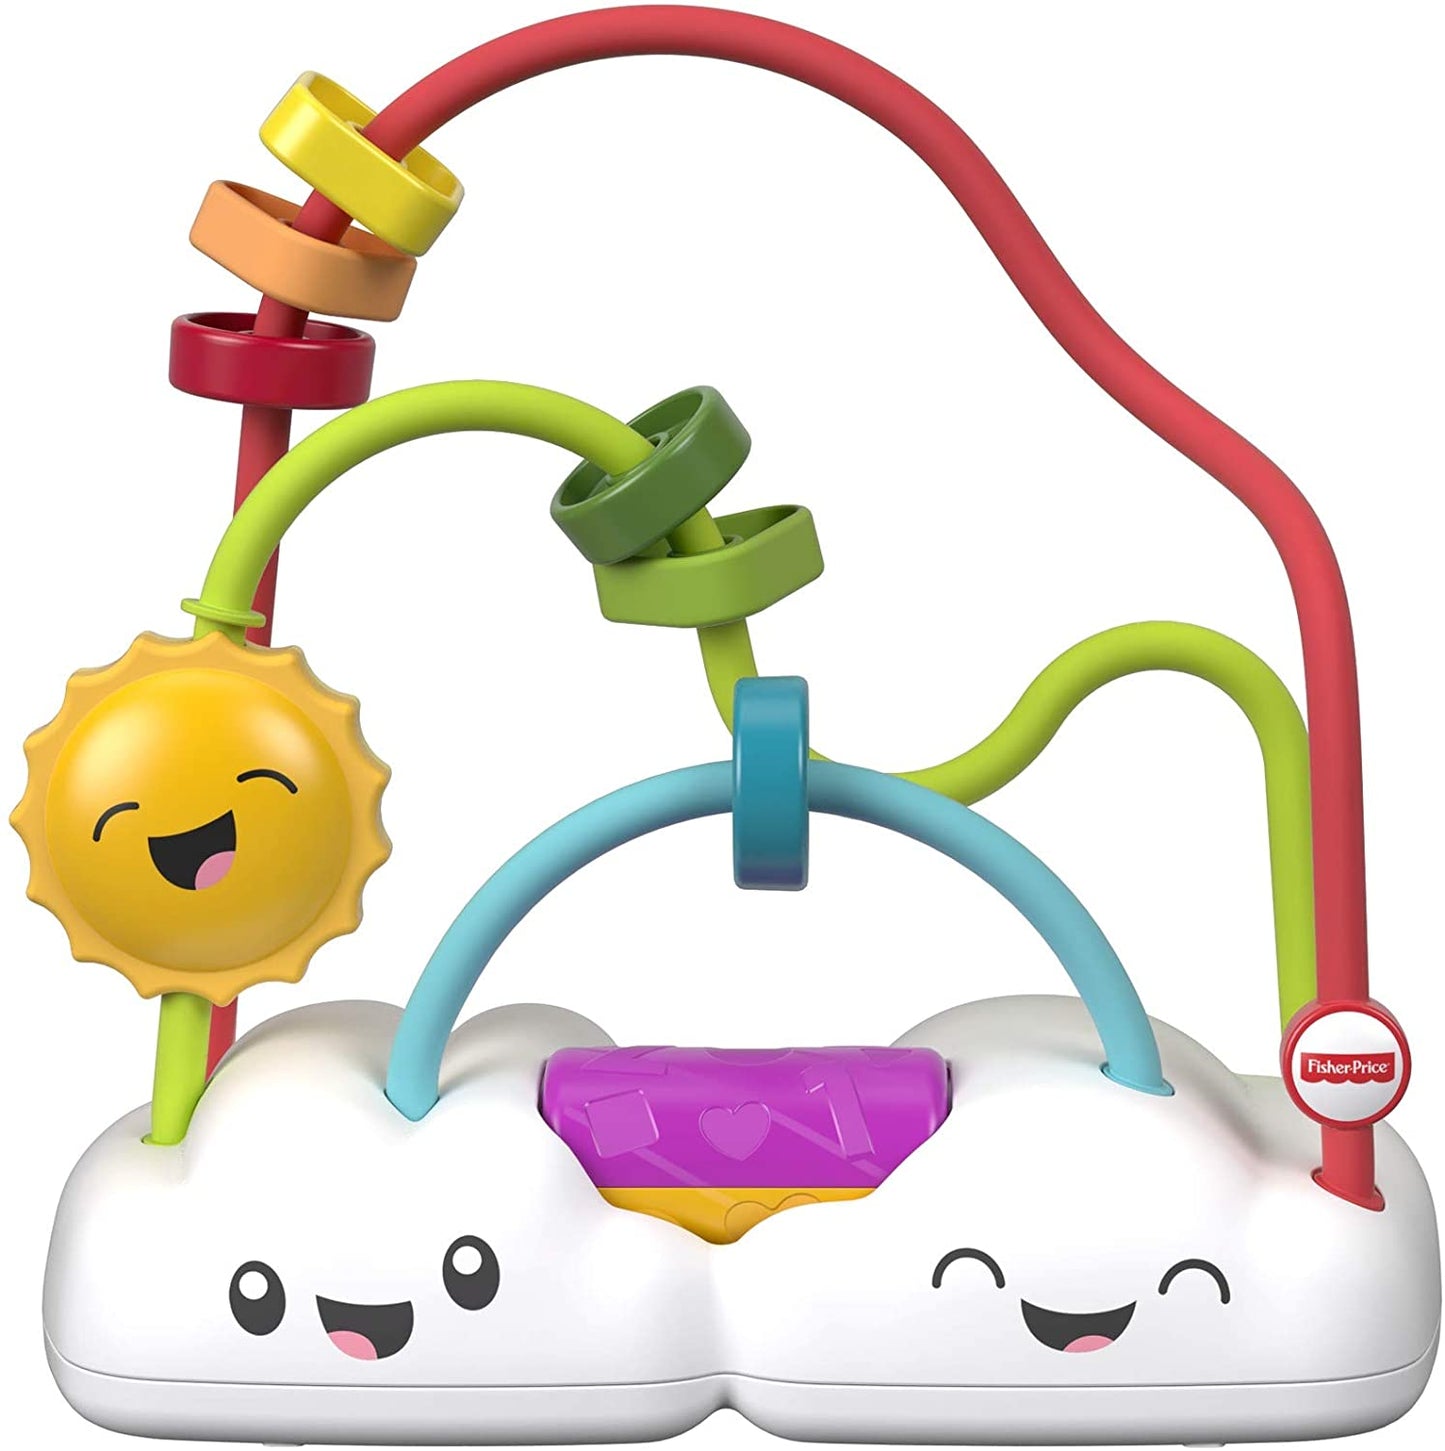 Fisher-Price Chasing Rainbows Bead Maze - Spin The Sun, Hear Exciting Clicking Sounds!